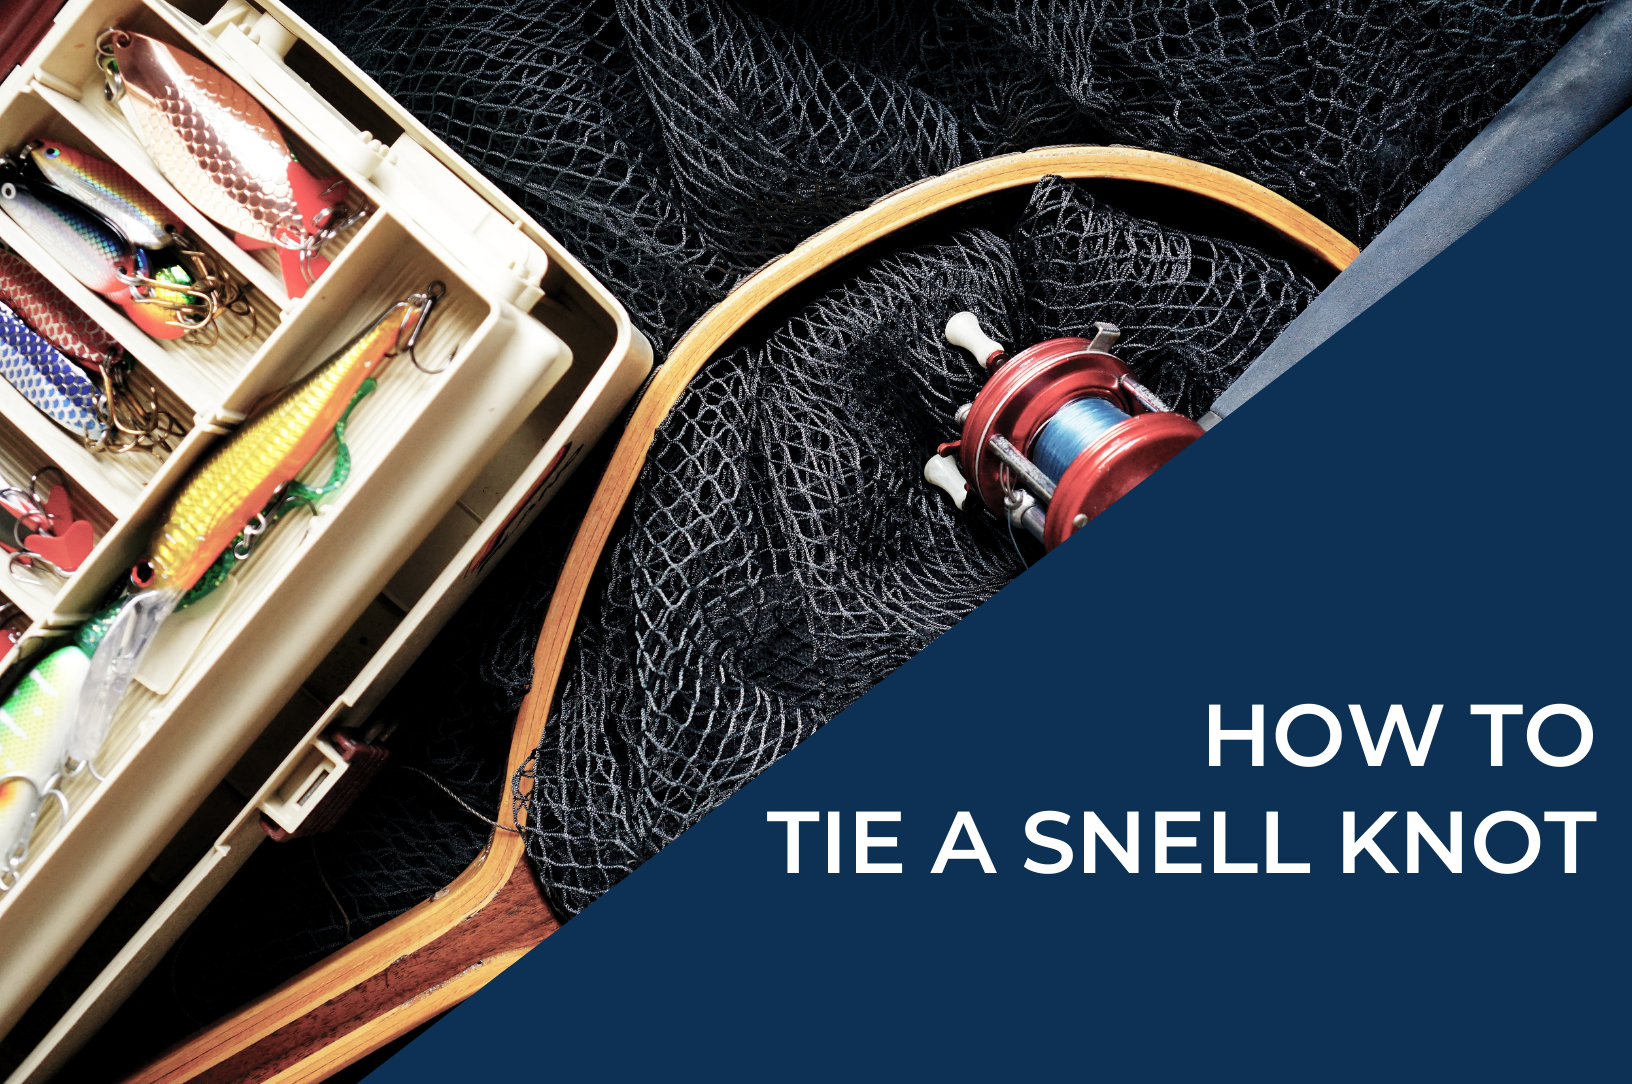 How to tie a snell knot